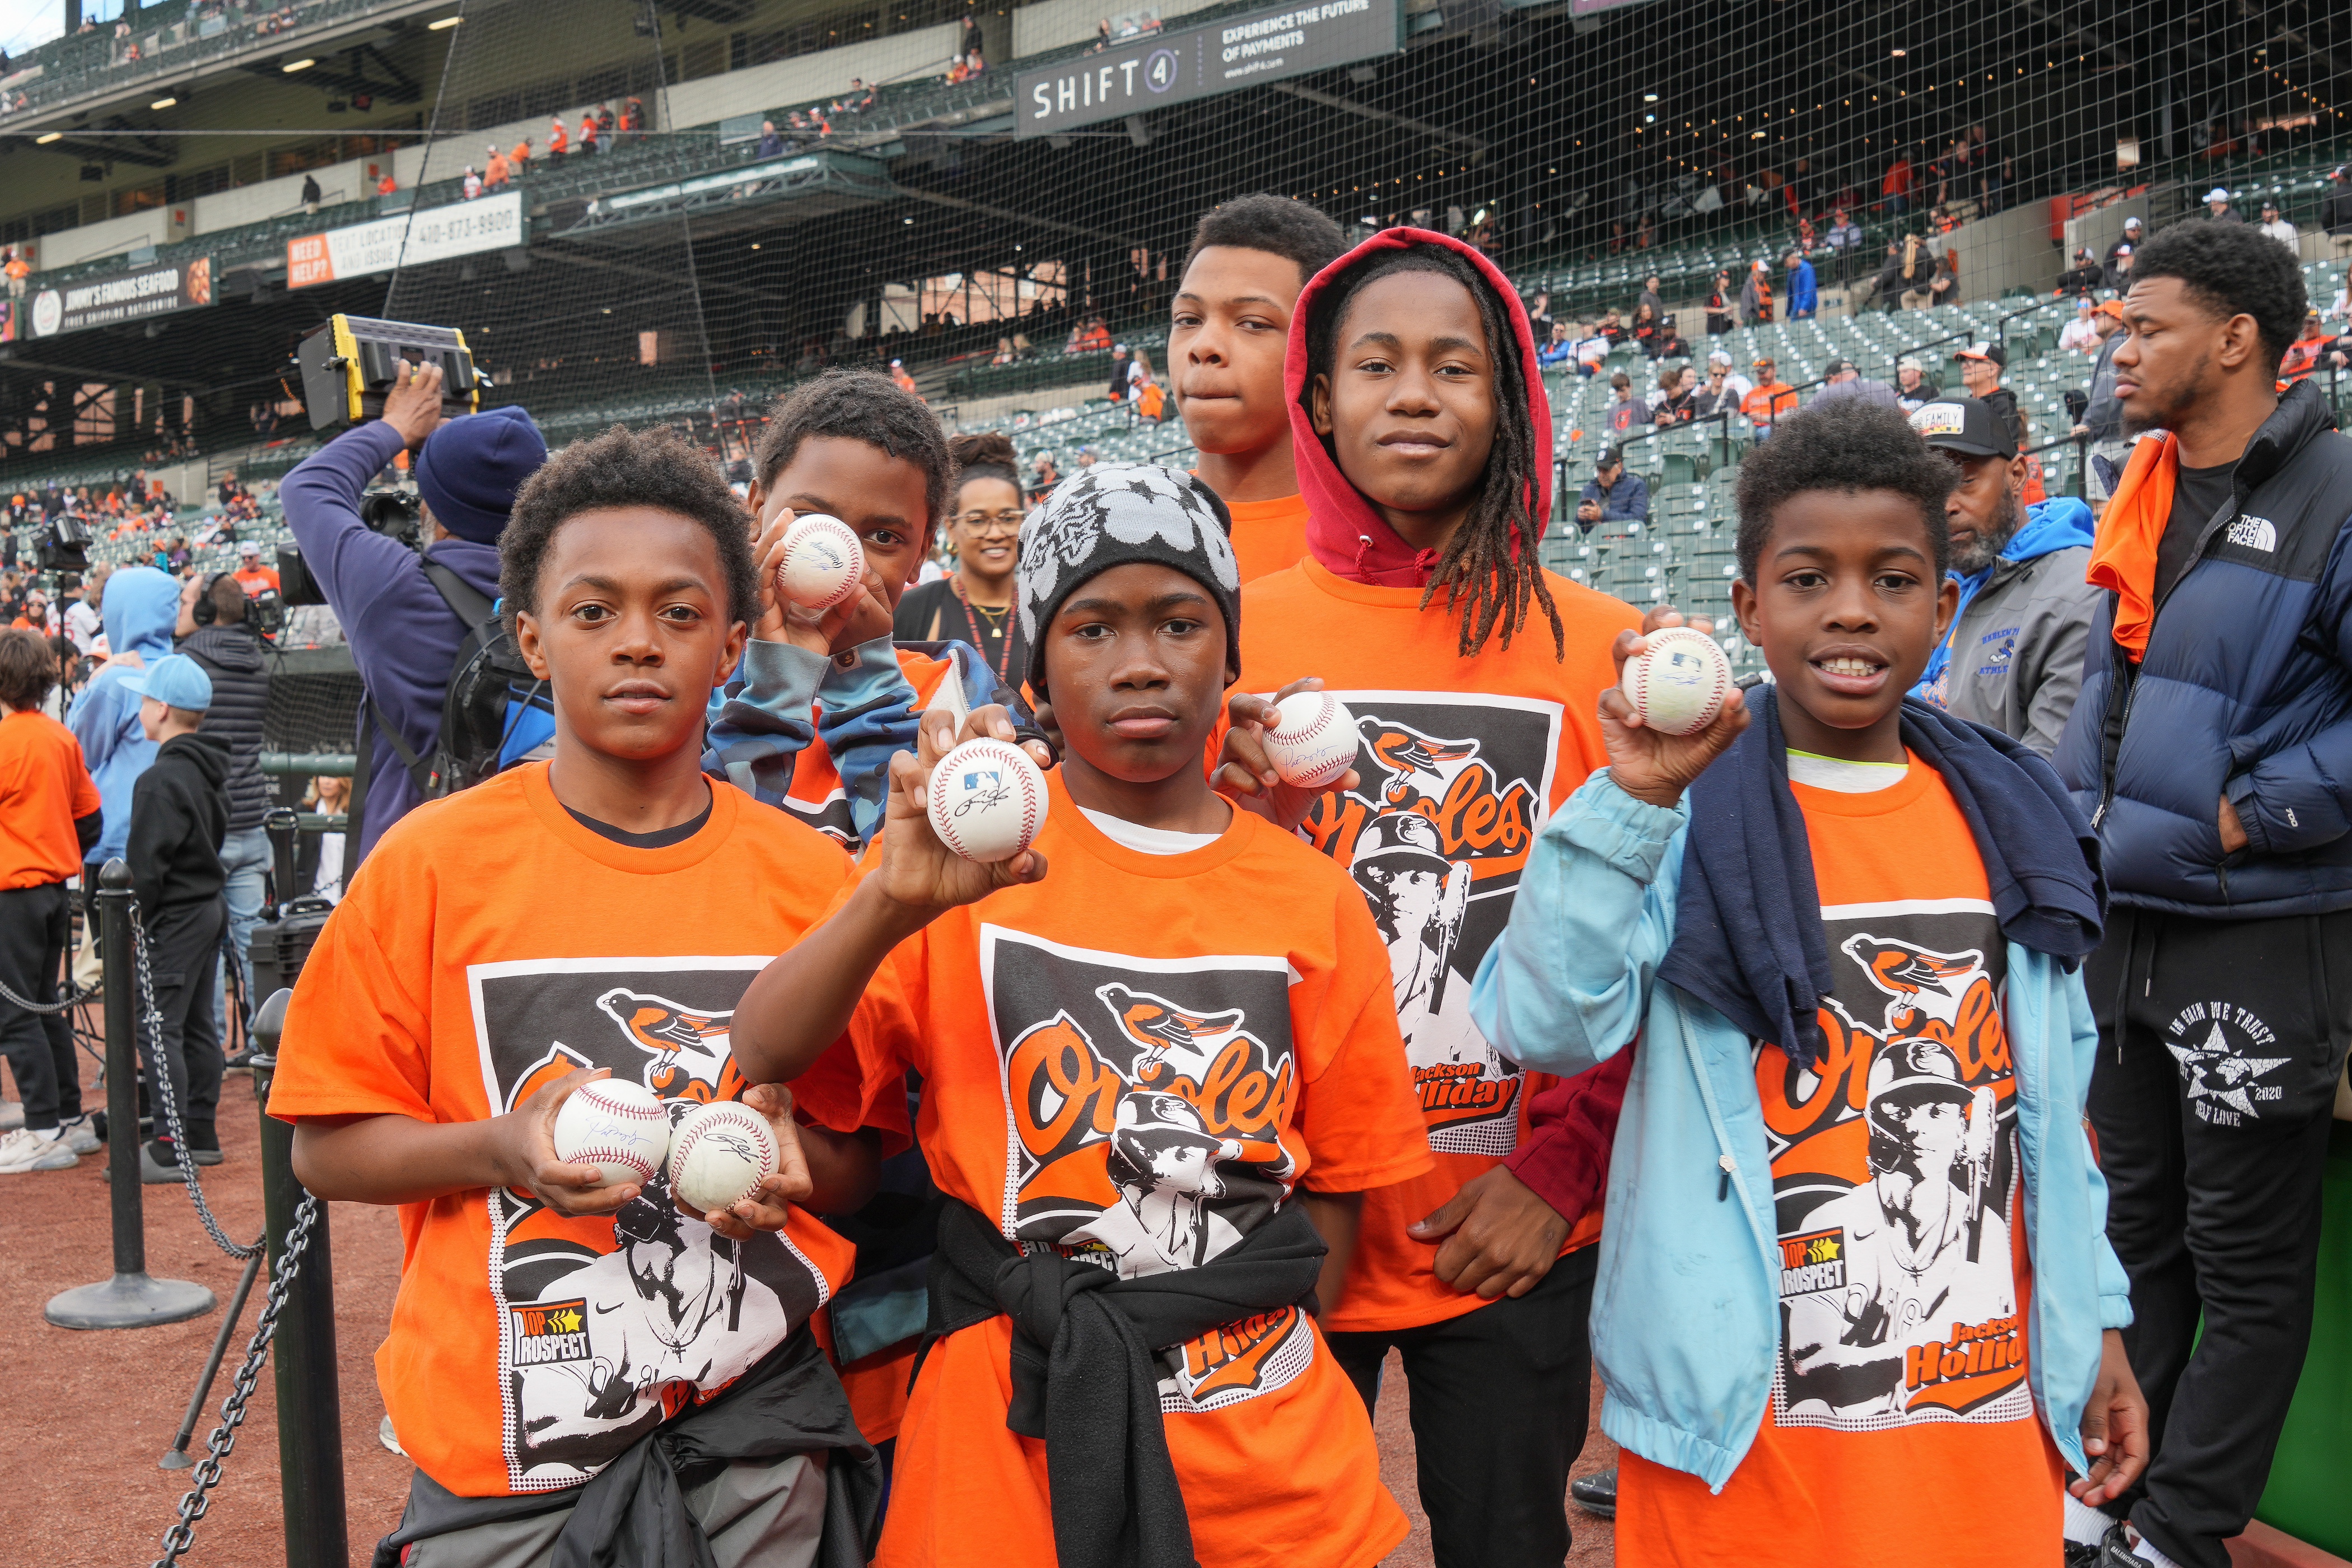 Harlem Park Elementary Students gather at the Orioles vs Brewsters game this friday